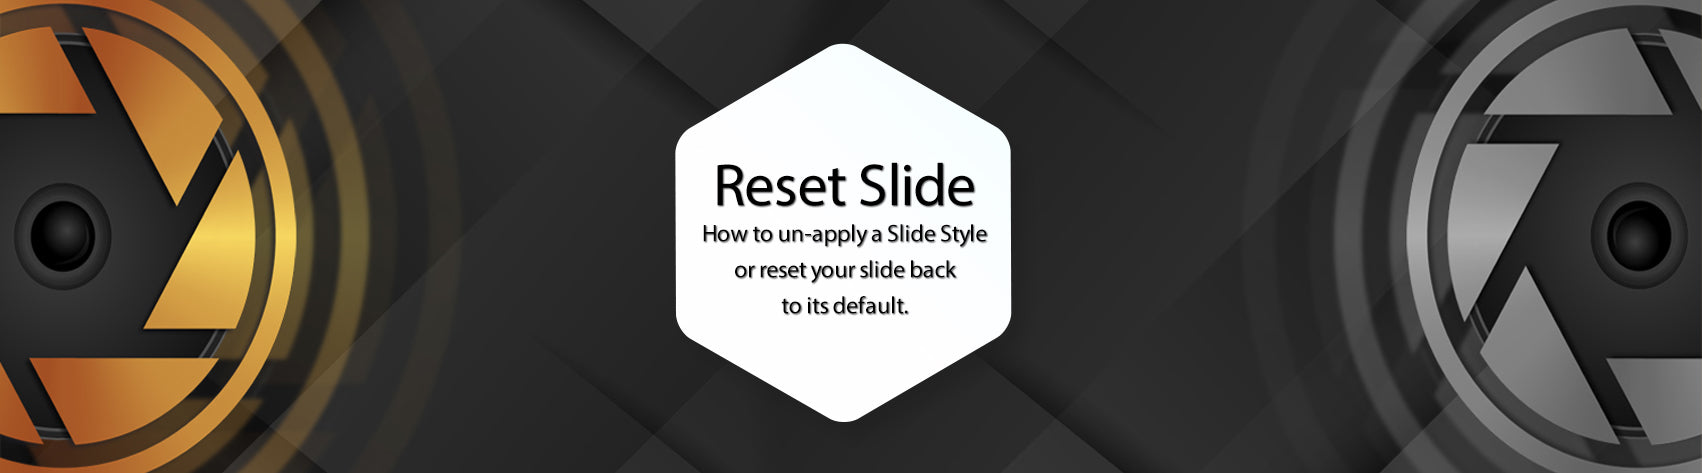 How to Reset a Slide